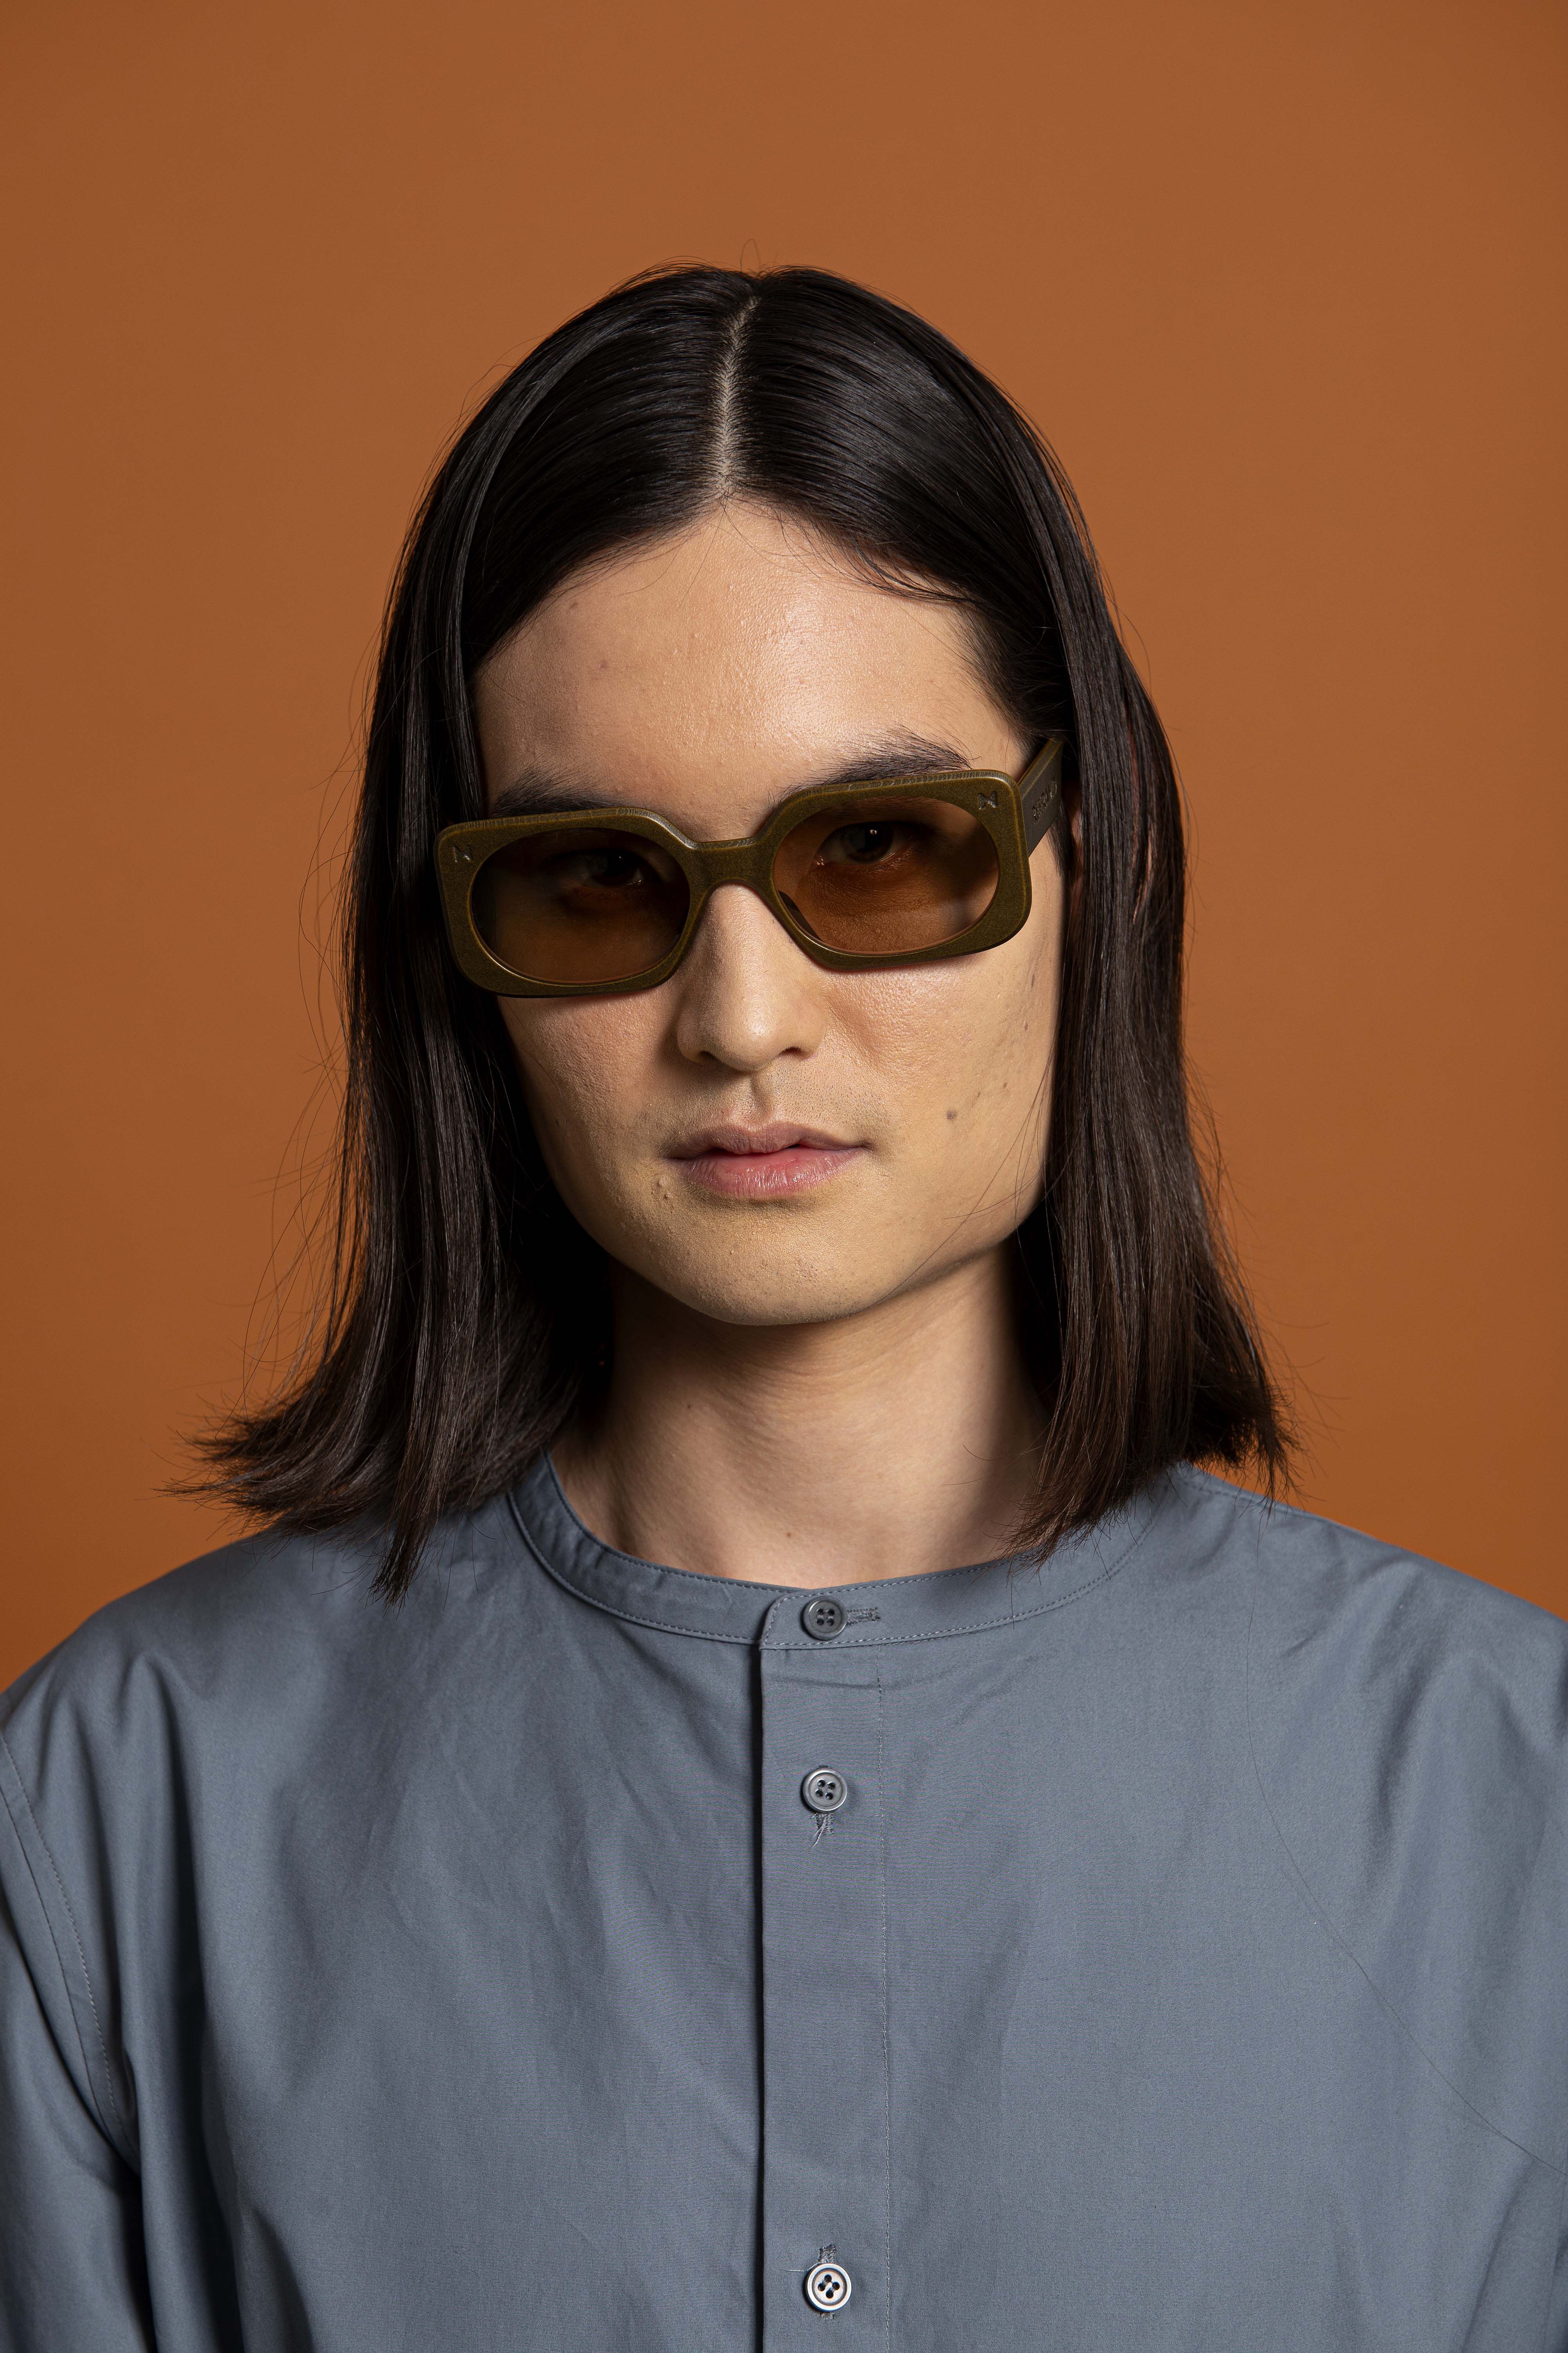 The eyewear brand striving for diversity and inclusion in the fashion  industry